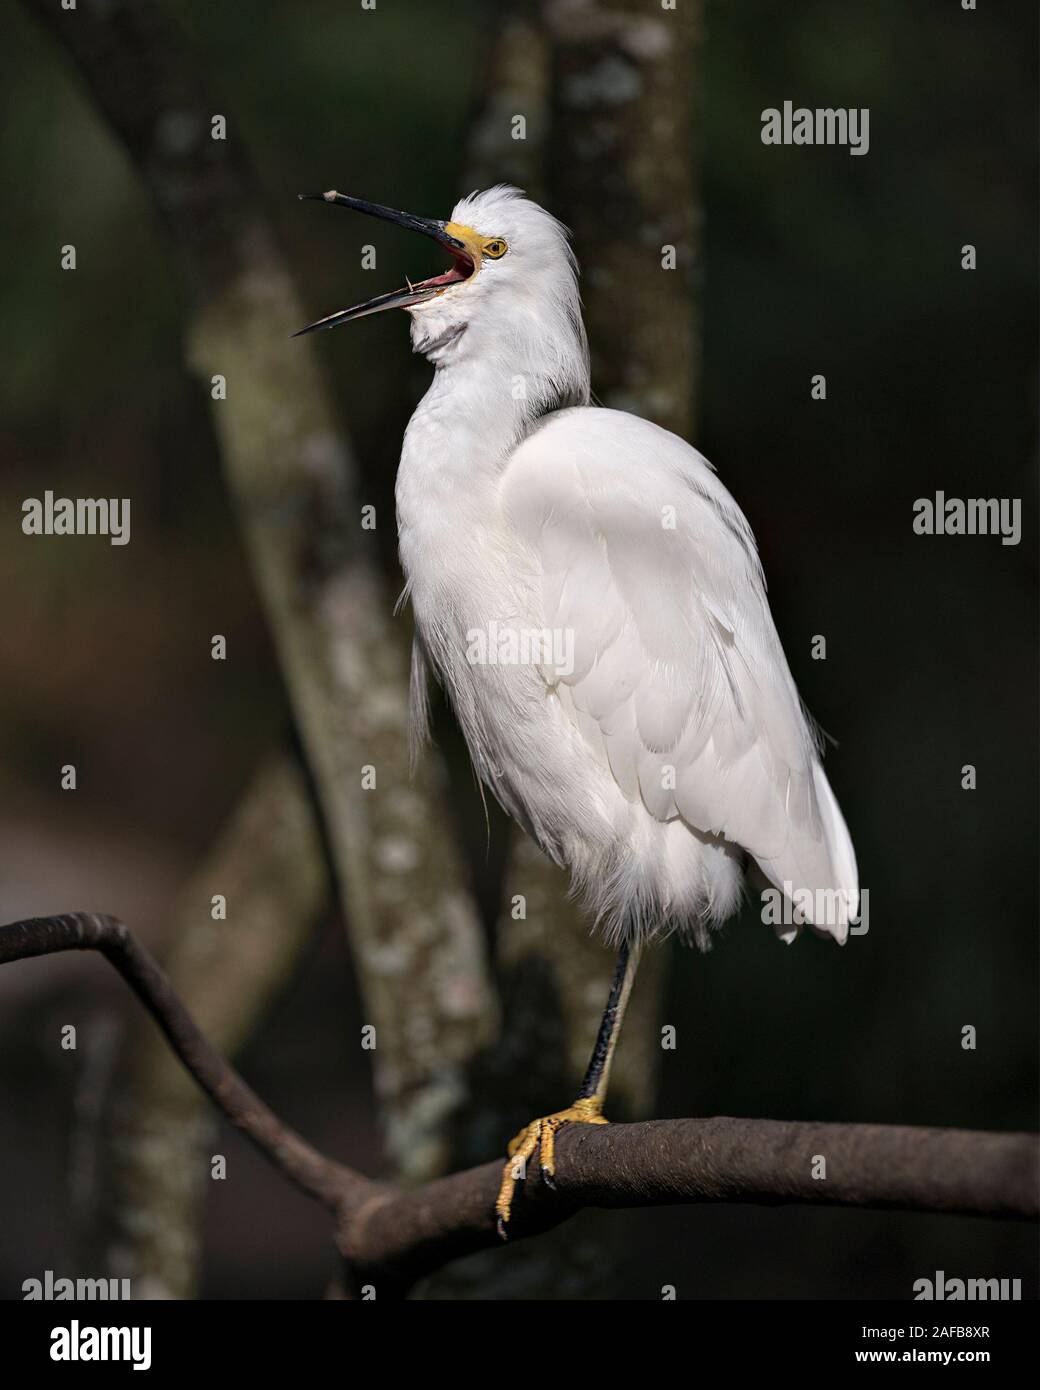 Snowy Egret close up profile view perched and shouting, singing, displaying white plumage, head, beak, eye, feet in its environment and surrounding wi Stock Photo